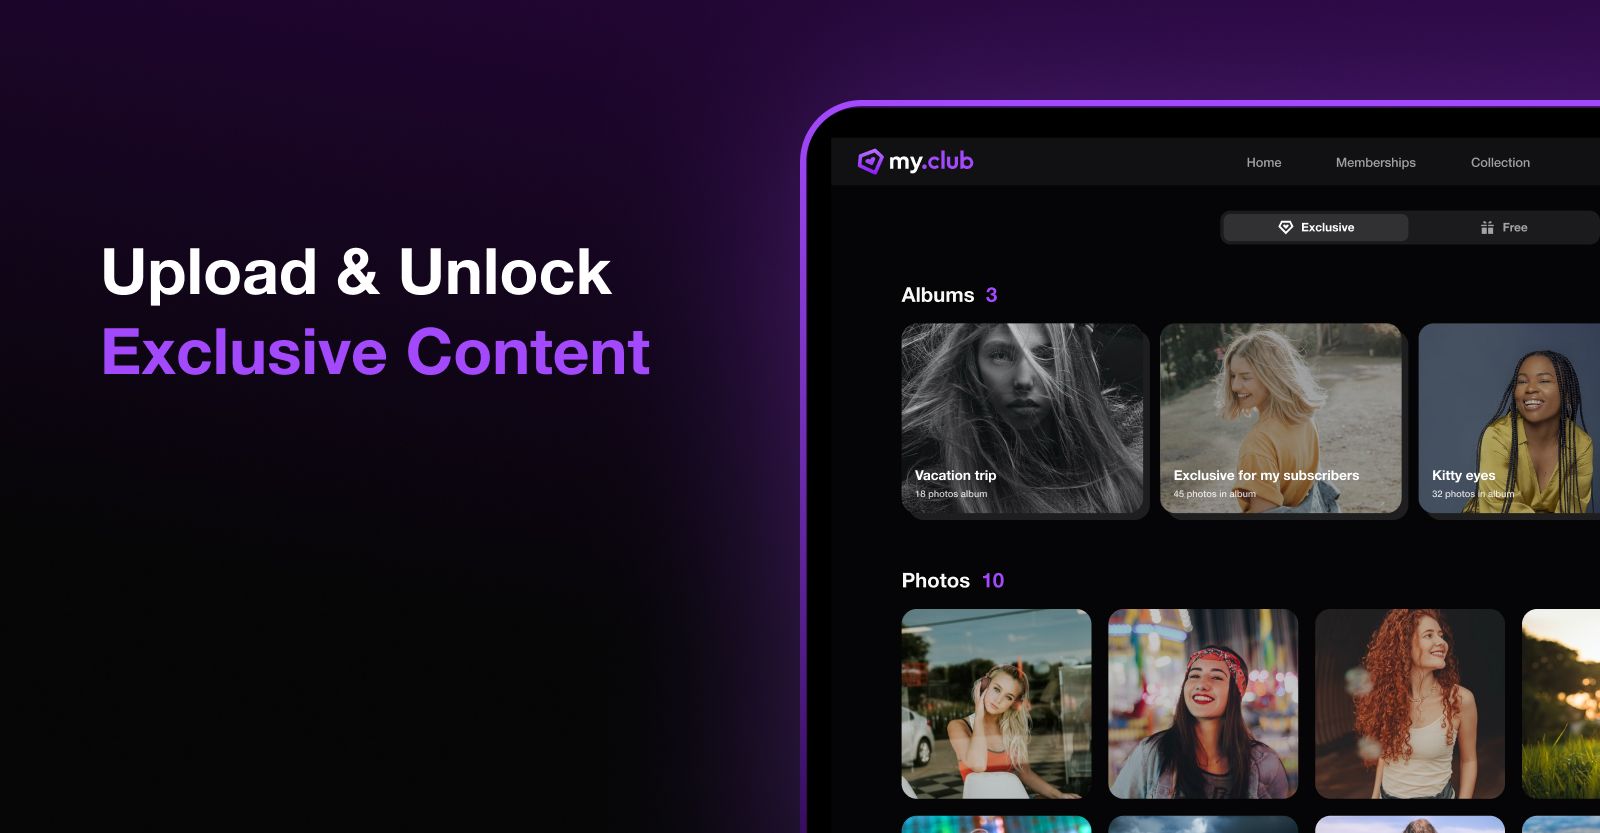 Upload and unlock exclusive content